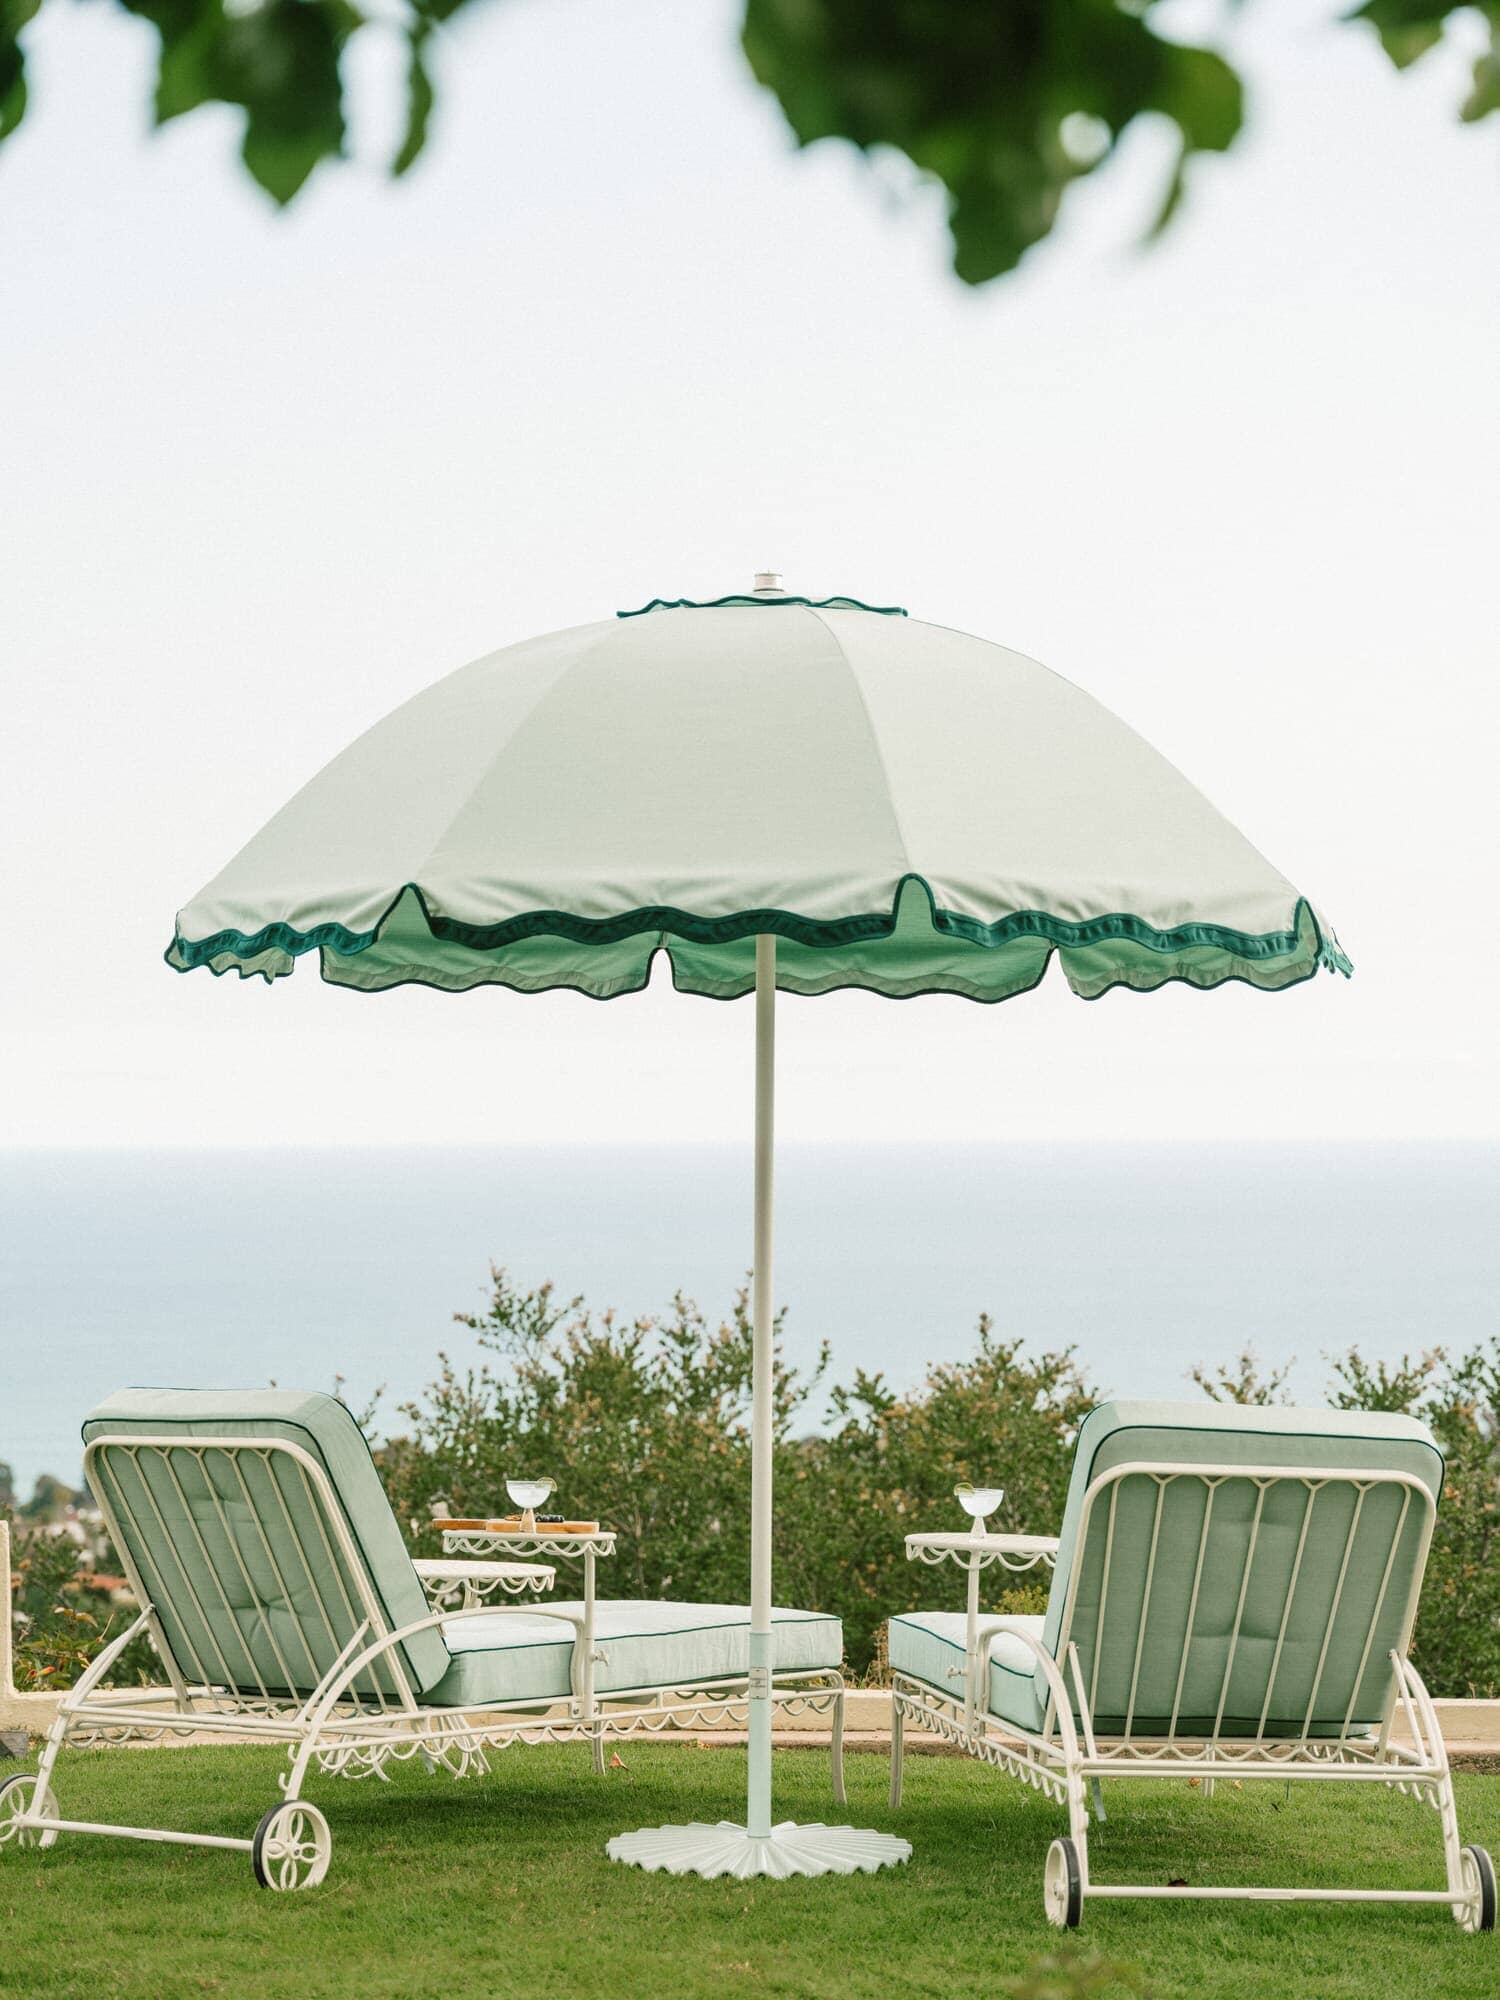 green patio umbrella and two sun loungers on a lawn